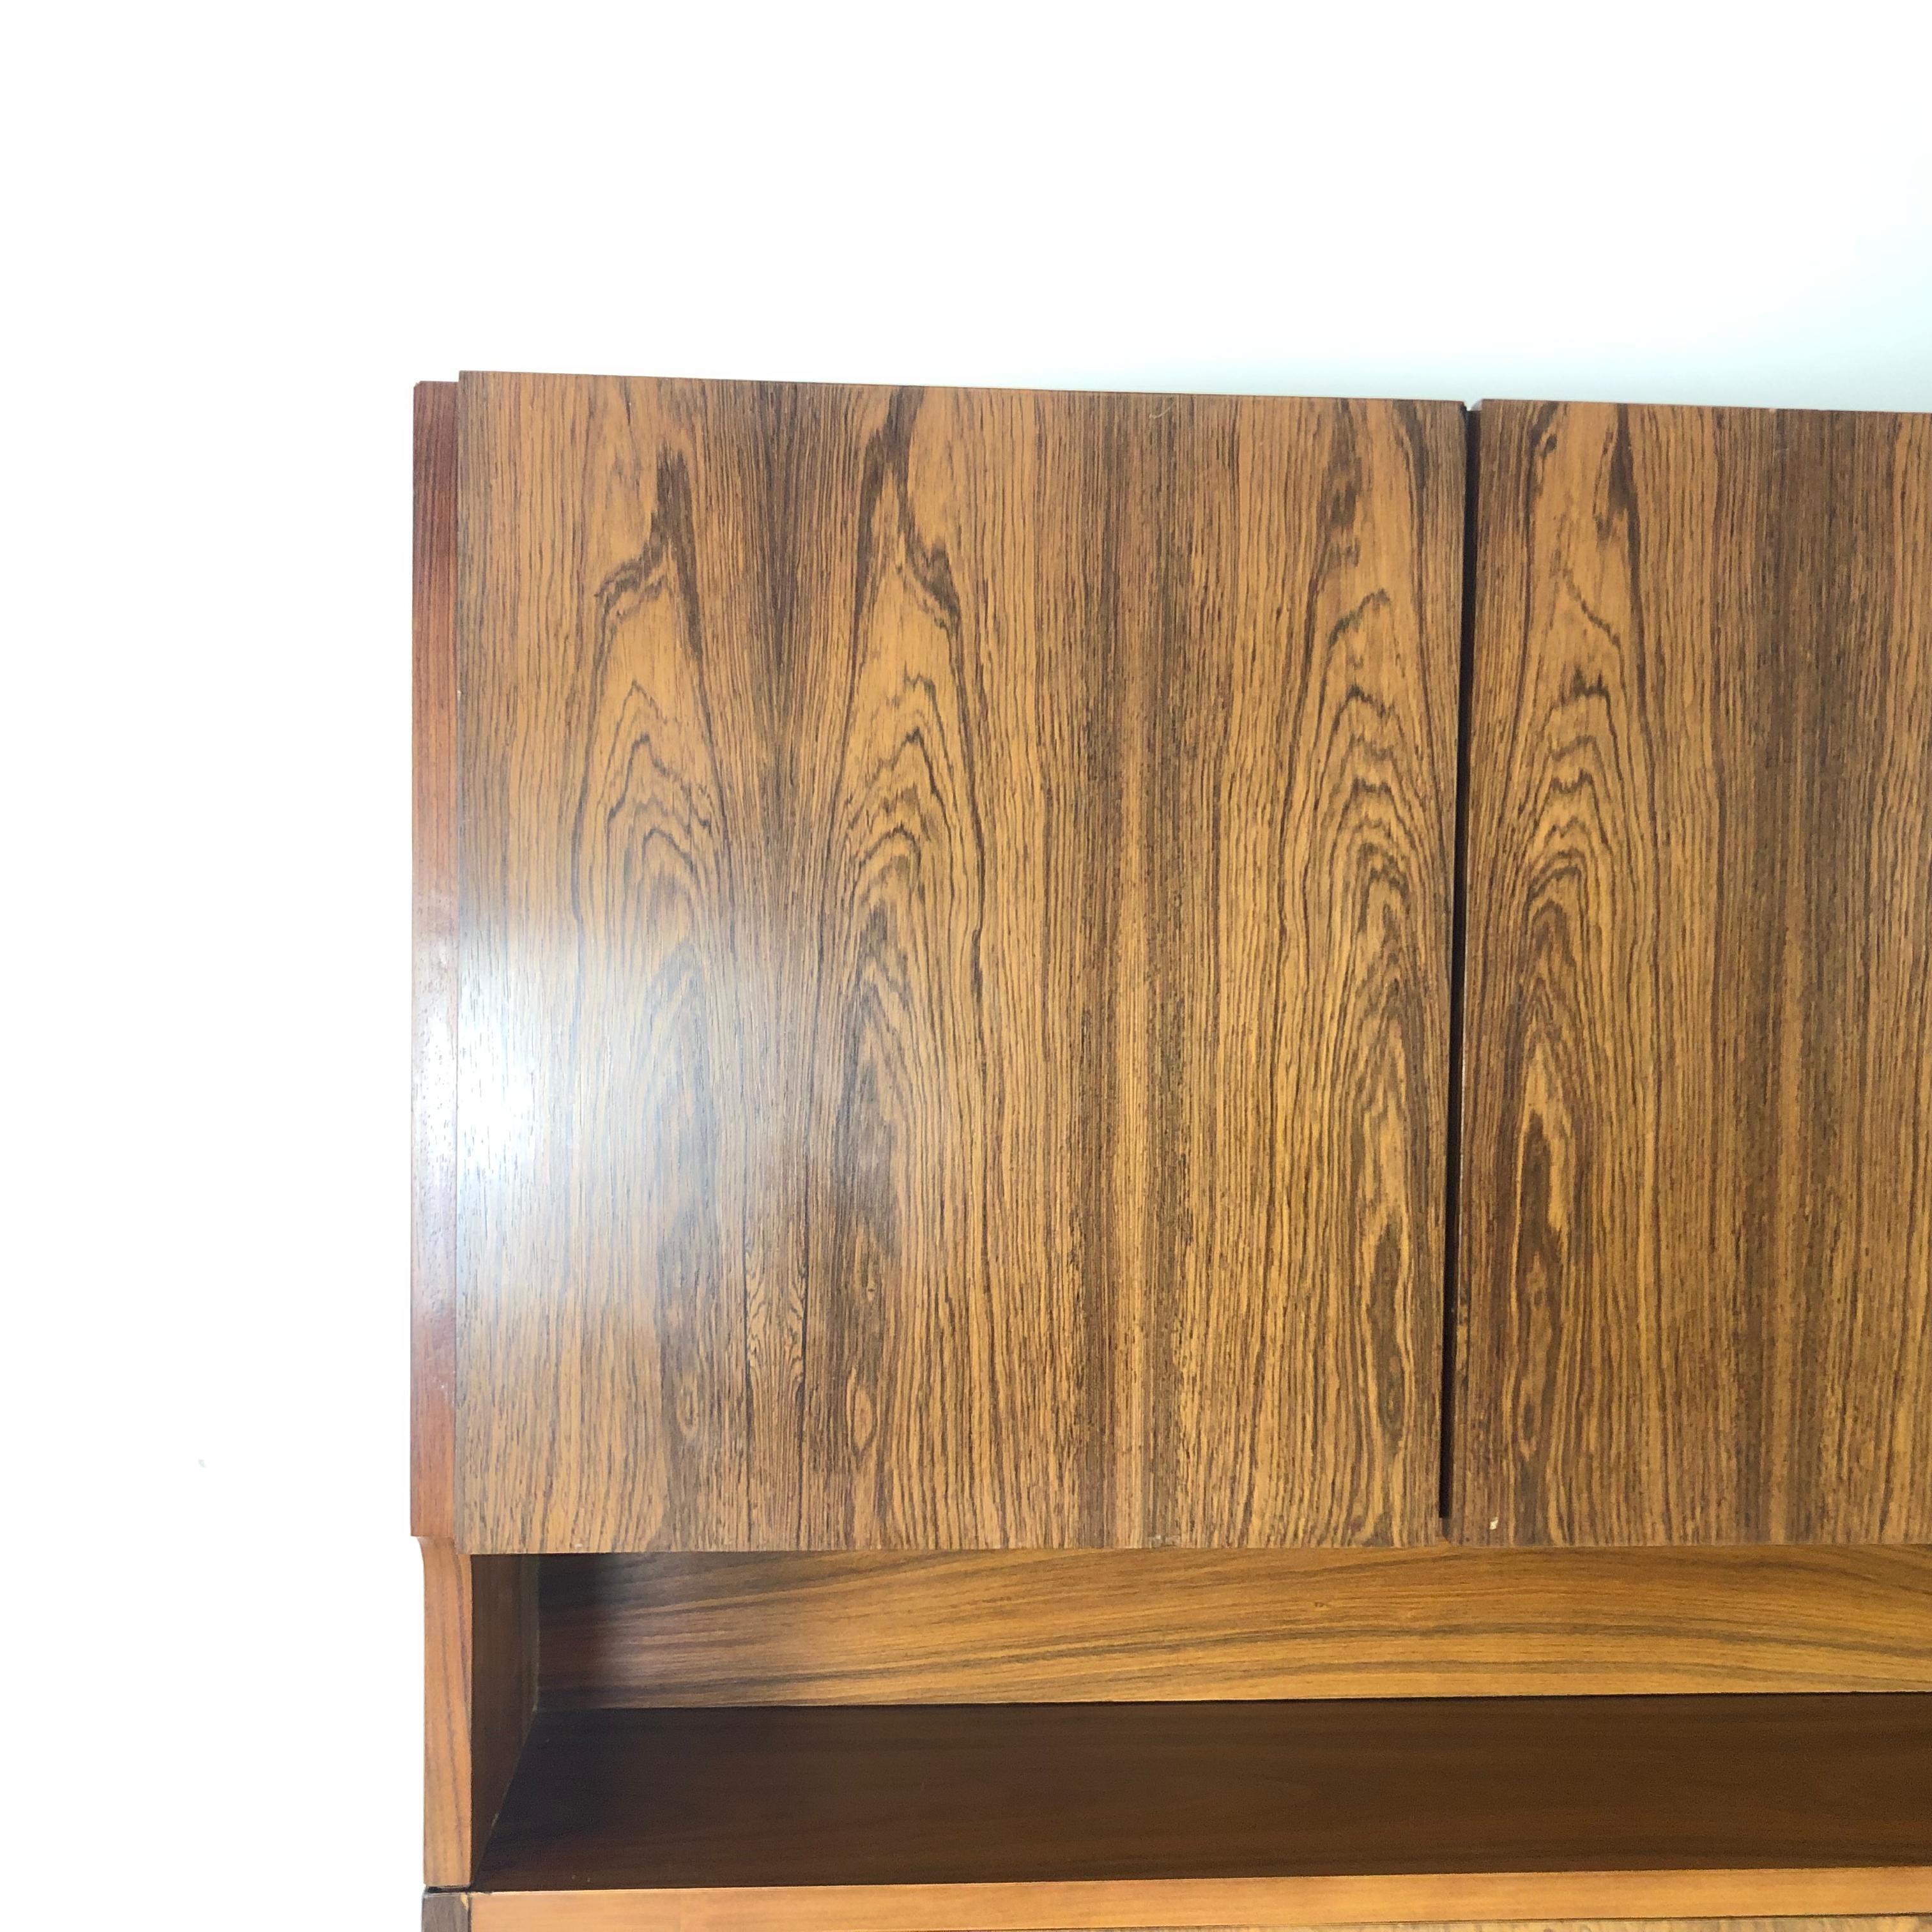 Vintage 1960s Rosewood Wall Unit by Robert Heritage for Archie Shine In Good Condition For Sale In Lewes, East Sussex